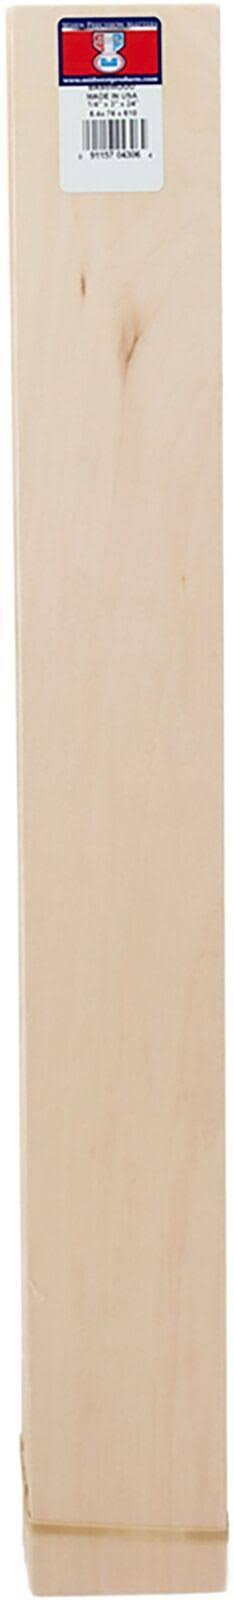 Midwest Products 4306 Basswood Sheet, 24 in L 10 Pack